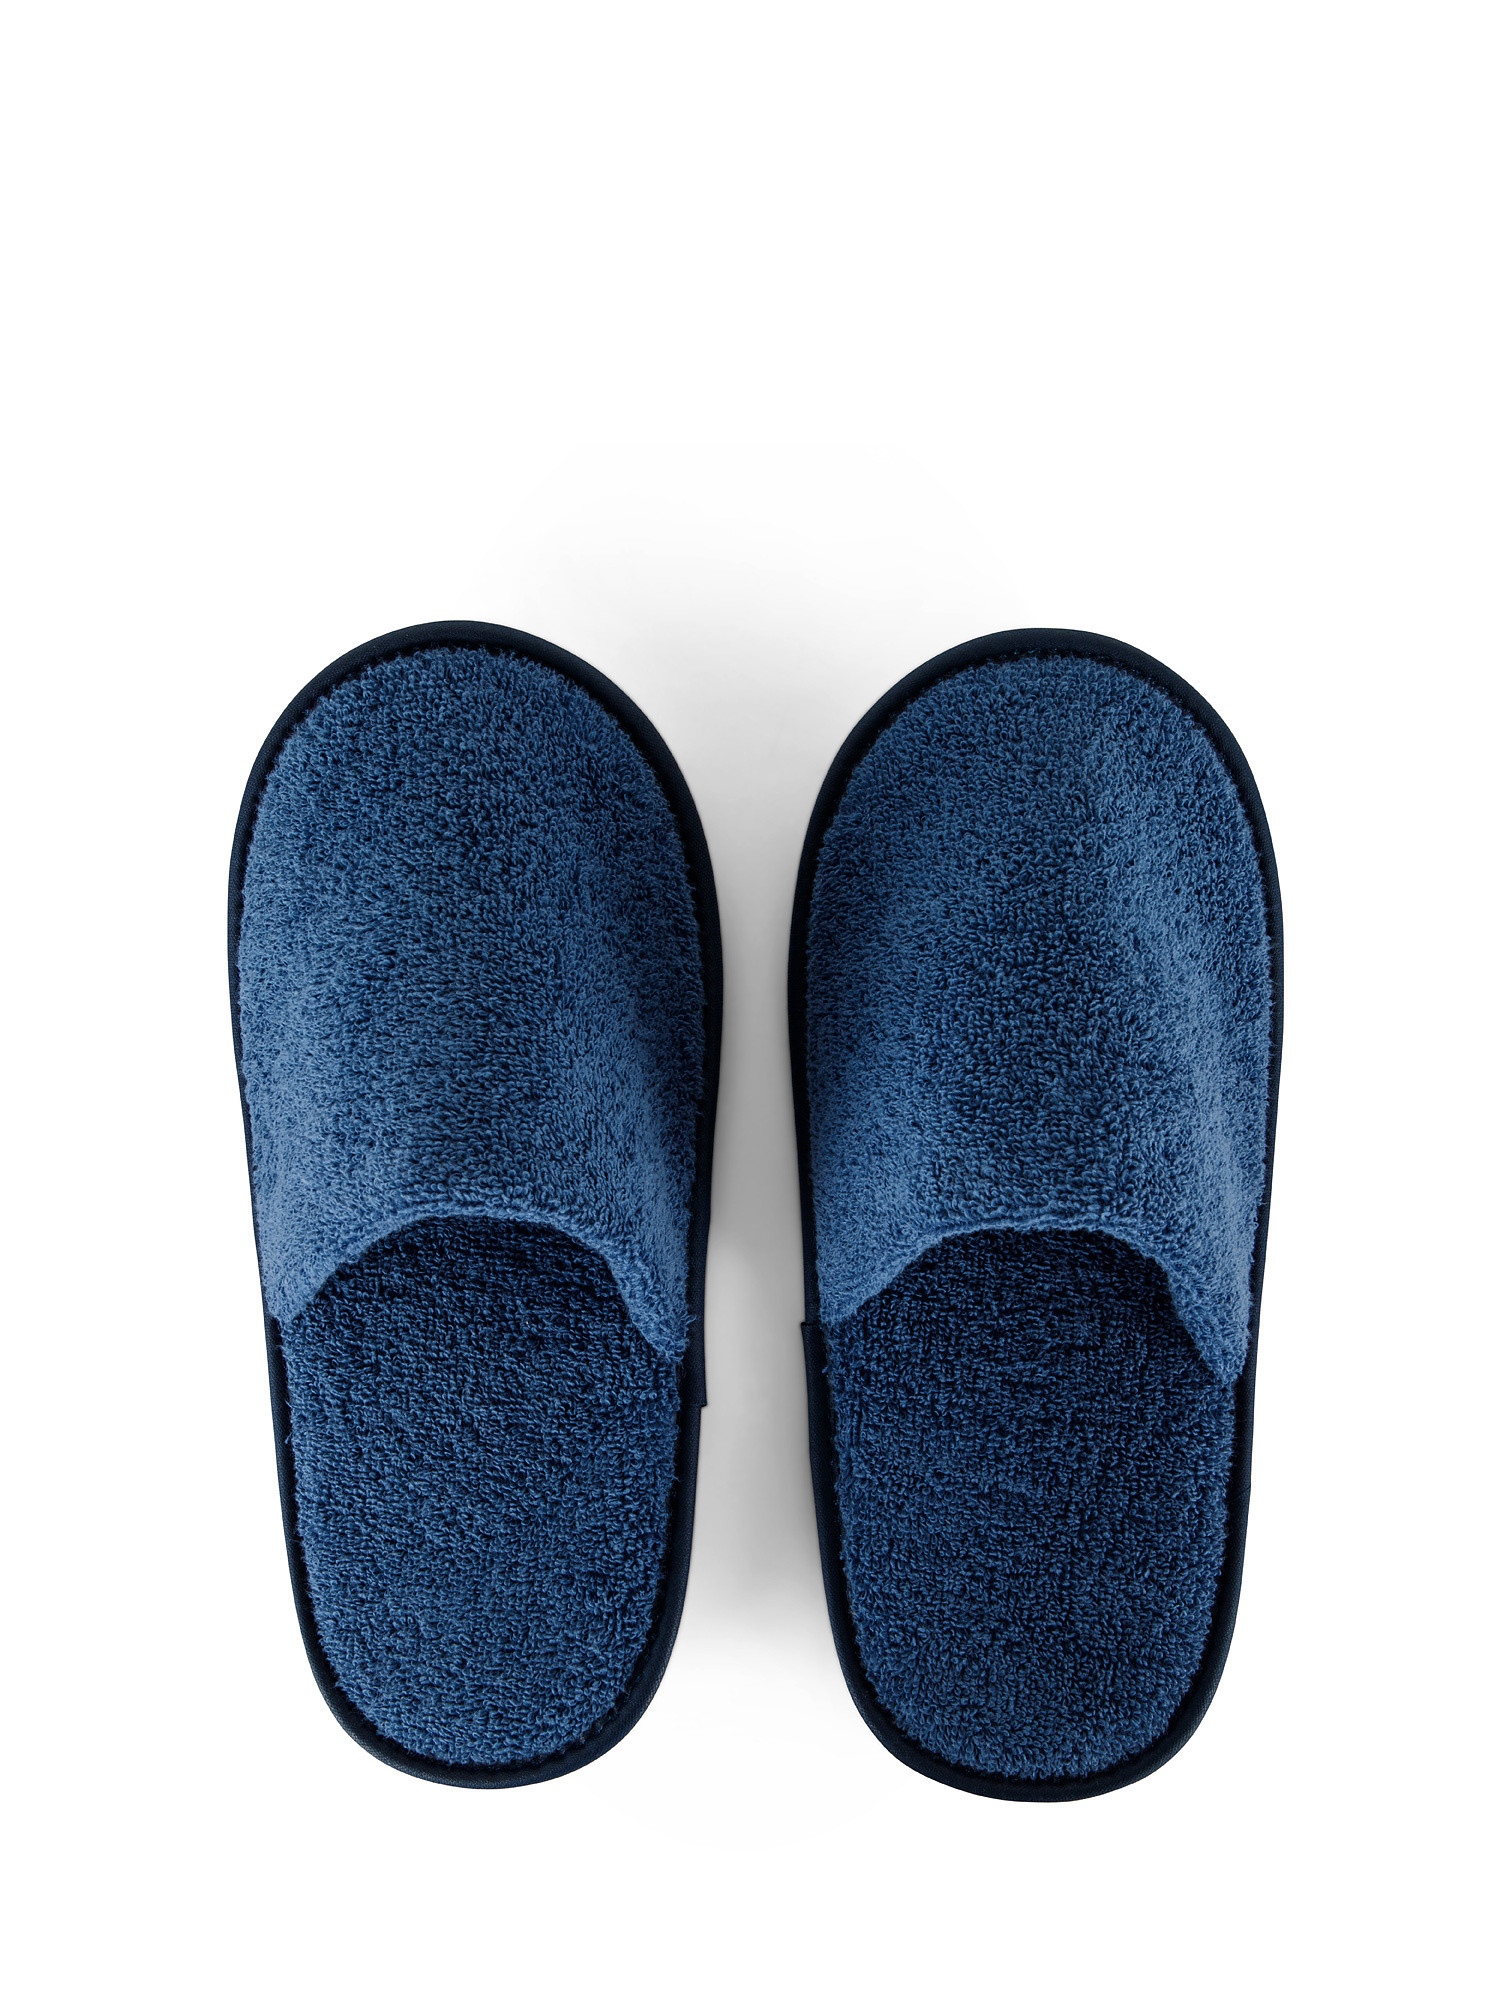 Solid color cotton terry slippers, Blue, large image number 0